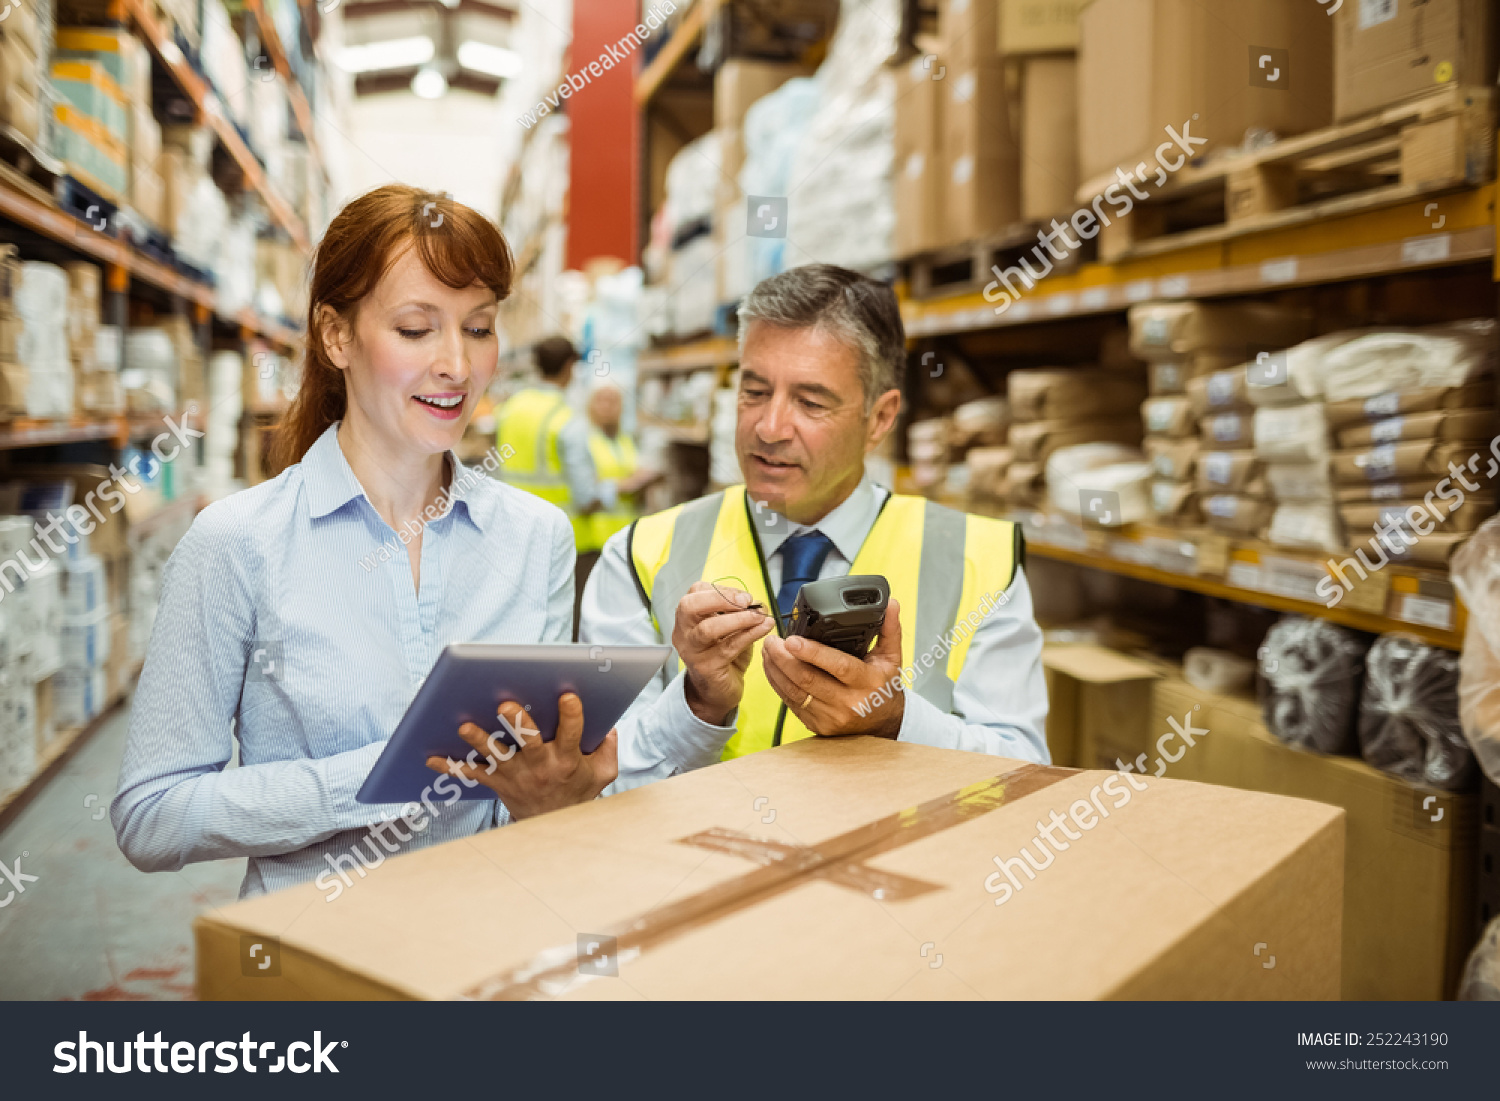 Close up of warehouse managers looking at tablet pc in a large warehouse #252243190